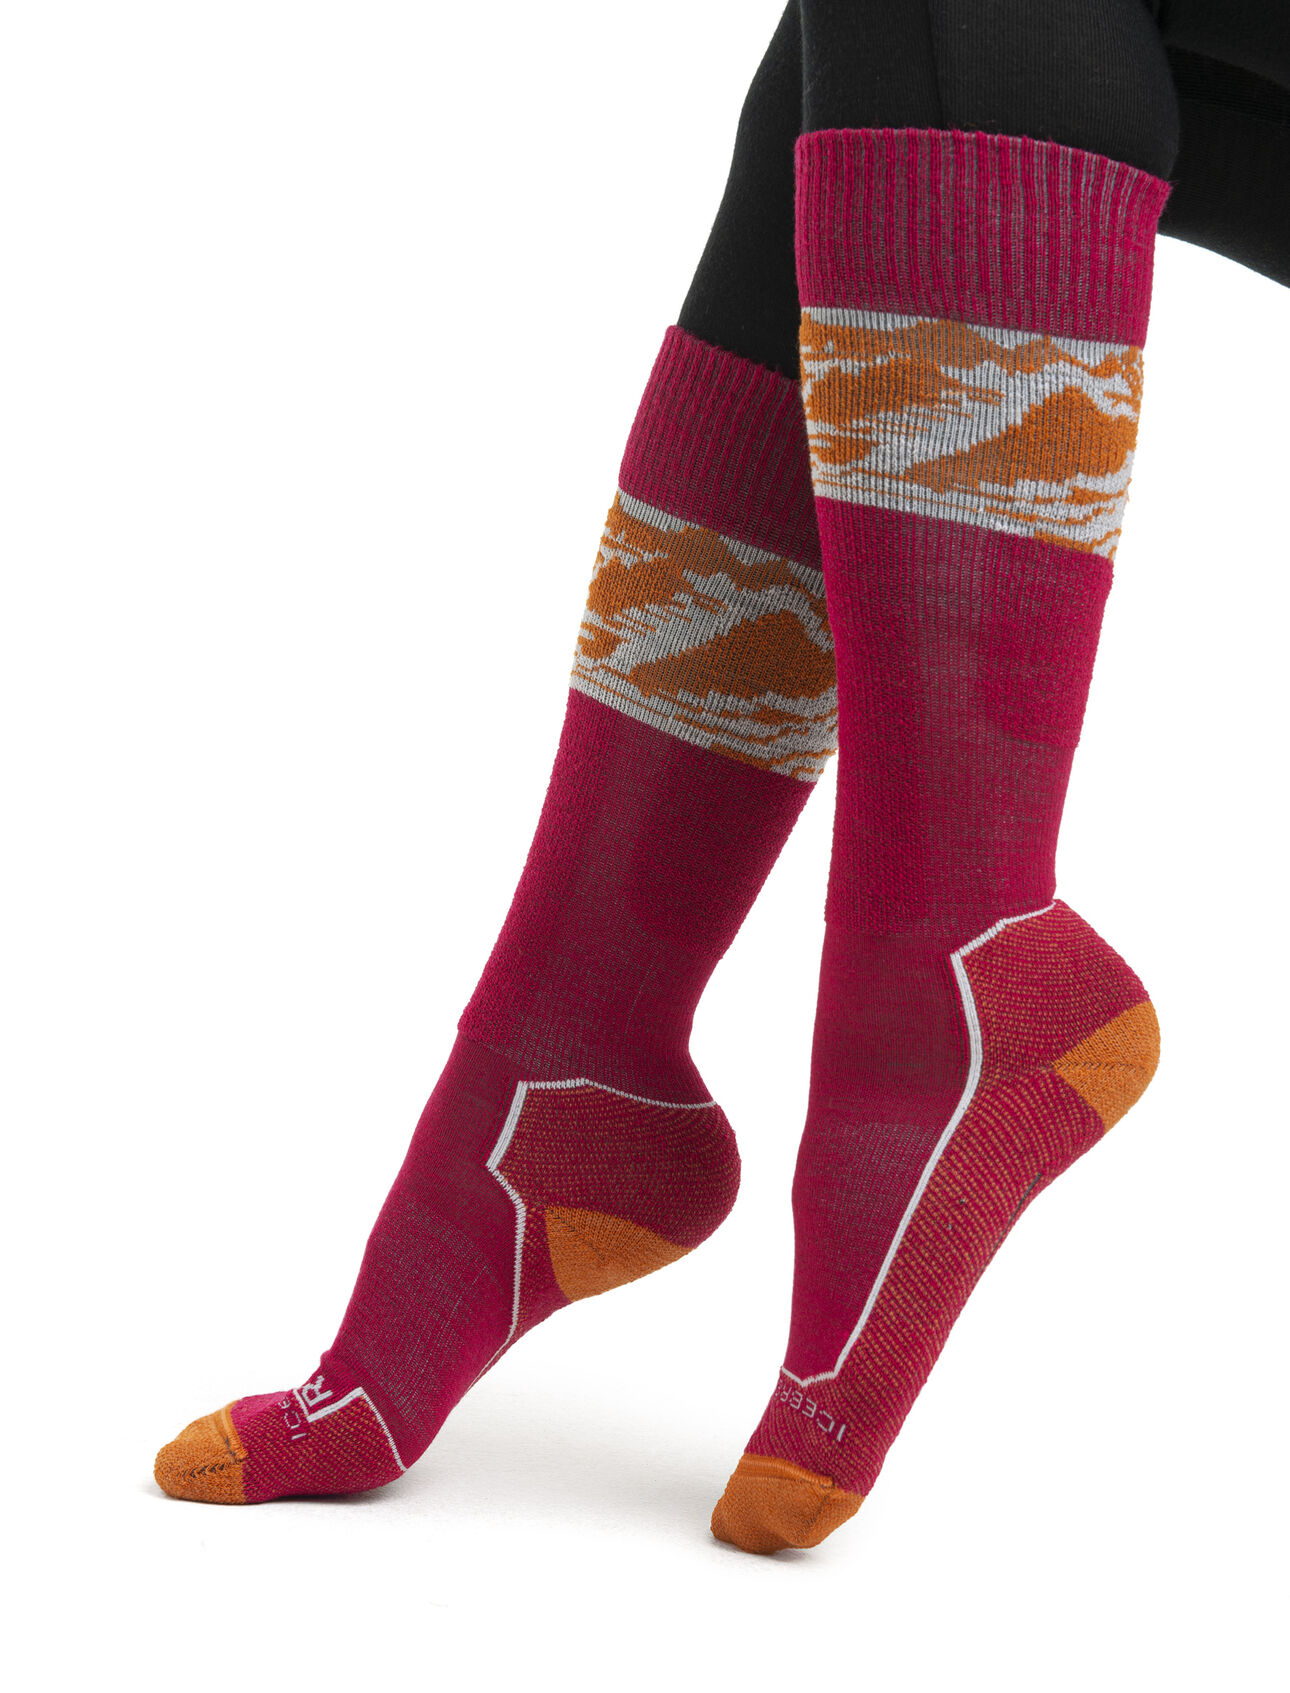 Womens Merino Ski+ Light Over the Calf Alps 3D Lightly cushioned ski socks for skiing the resort or the backcountry, the Ski+ Light Over the Calf Alps 3D socks are made with a durable, breathable merino wool blend.